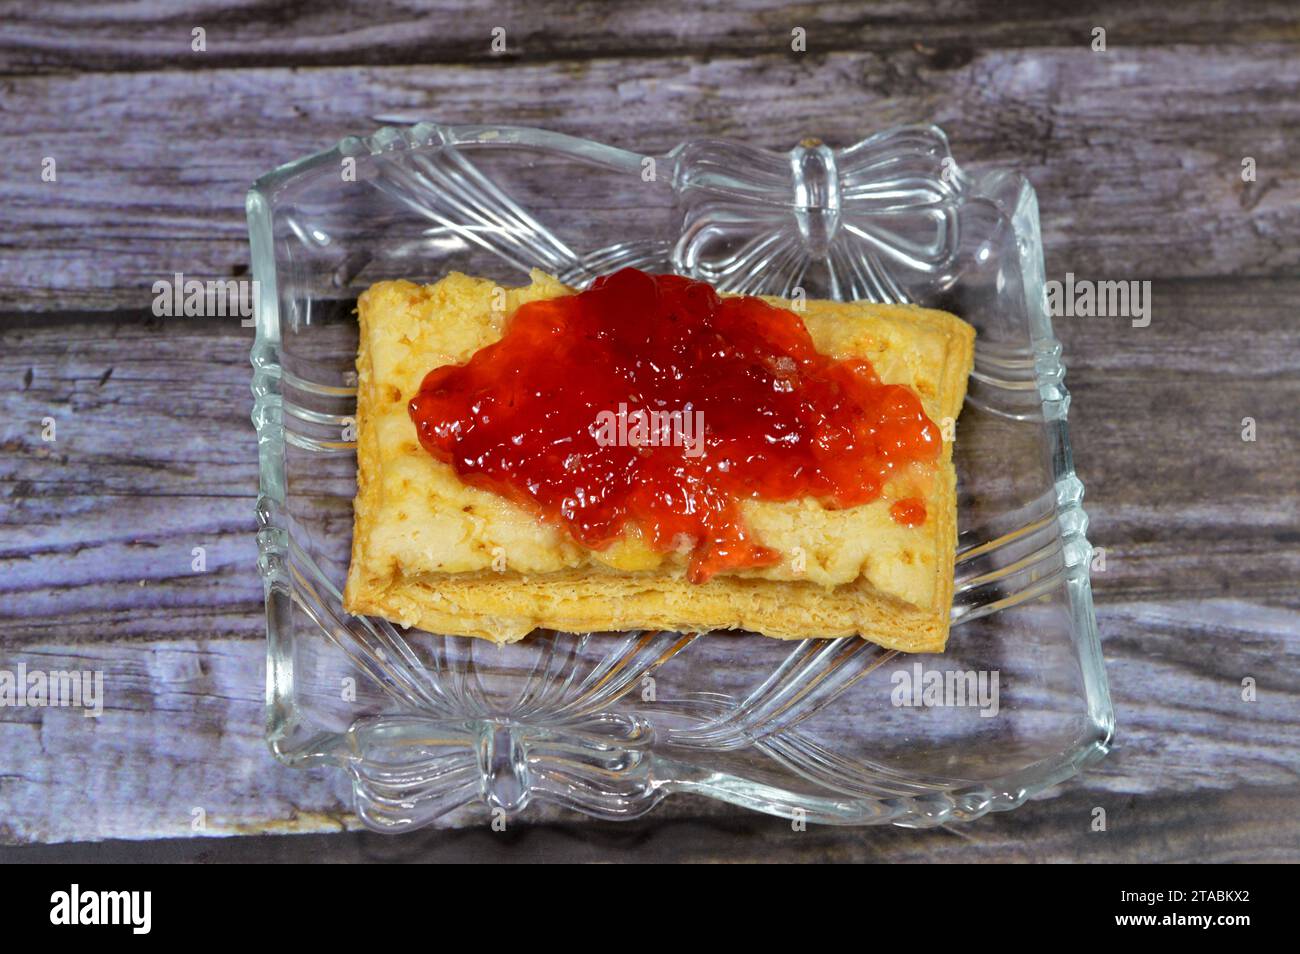 mille-feuille, millefeuille, Napoleon, vanilla and custard slice topped and covered with strawberry jam, a French dessert made of puff pastry layered Stock Photo